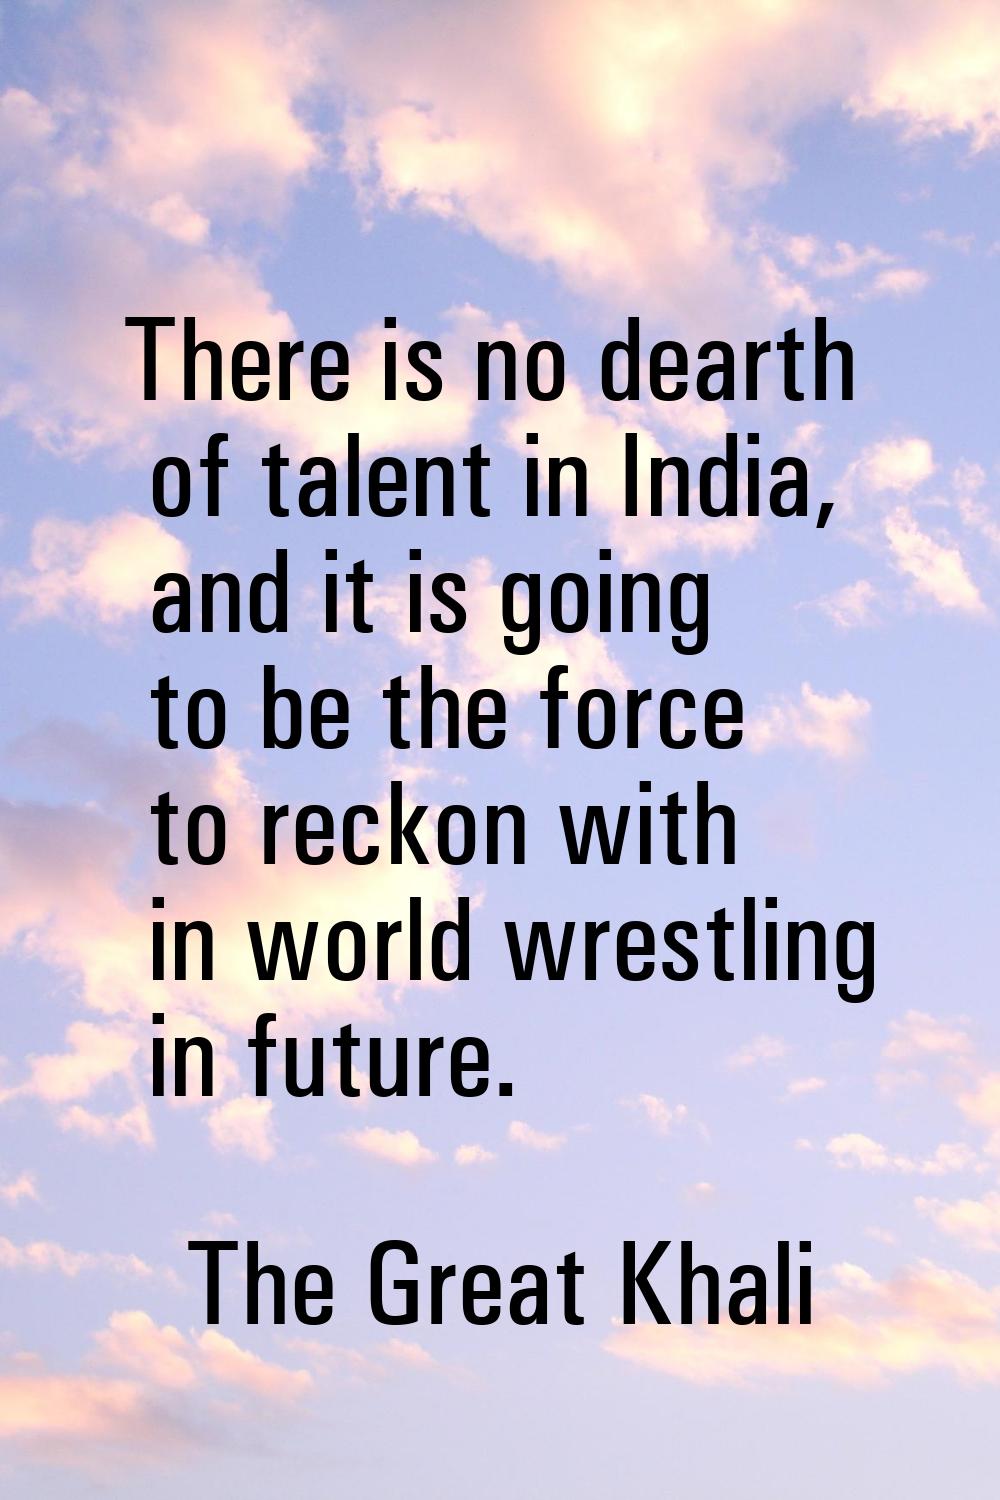 There is no dearth of talent in India, and it is going to be the force to reckon with in world wres